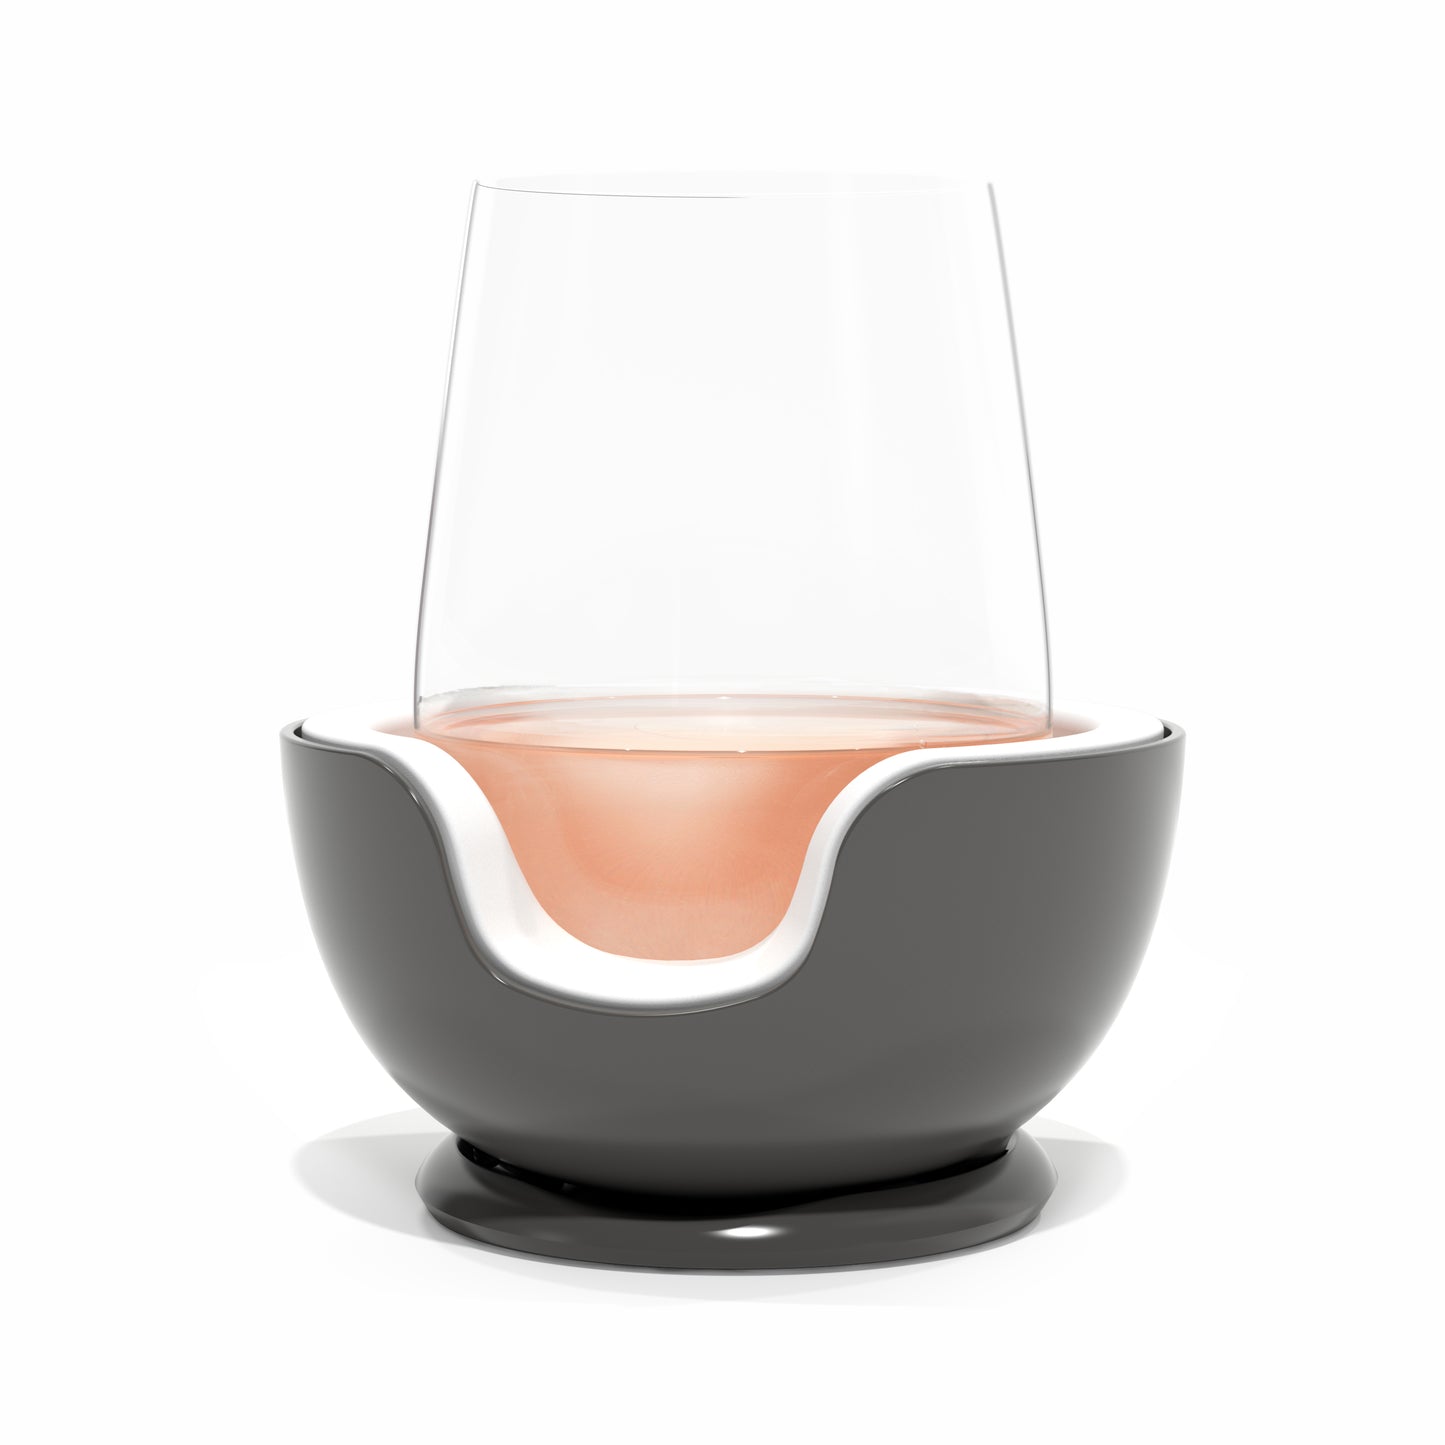 This Wine Chiller Is A Must-Have Summer Purchase - VoChill Review